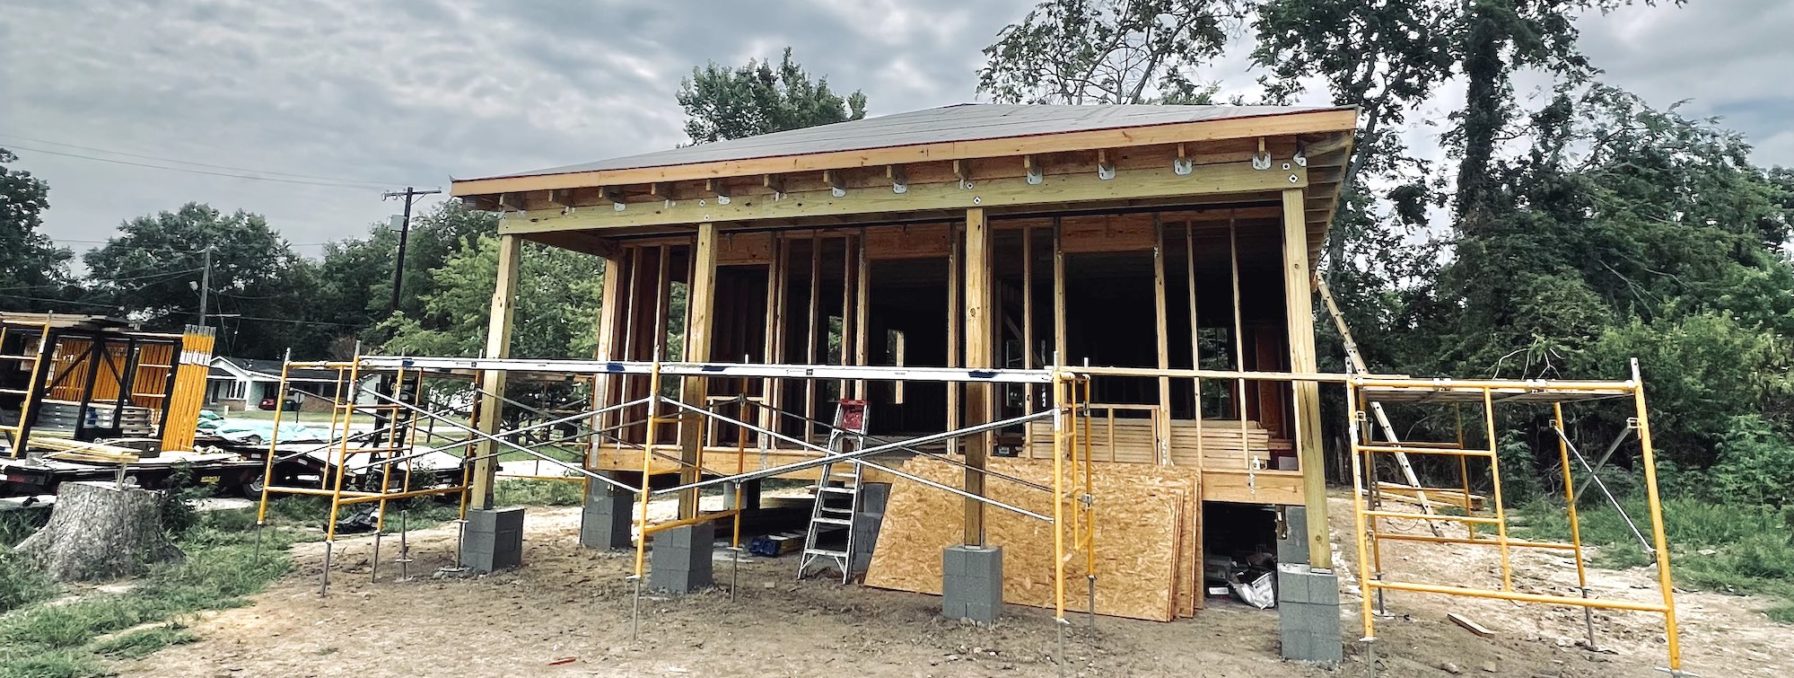 New home under construction in Welsh, LA. The new RV project location